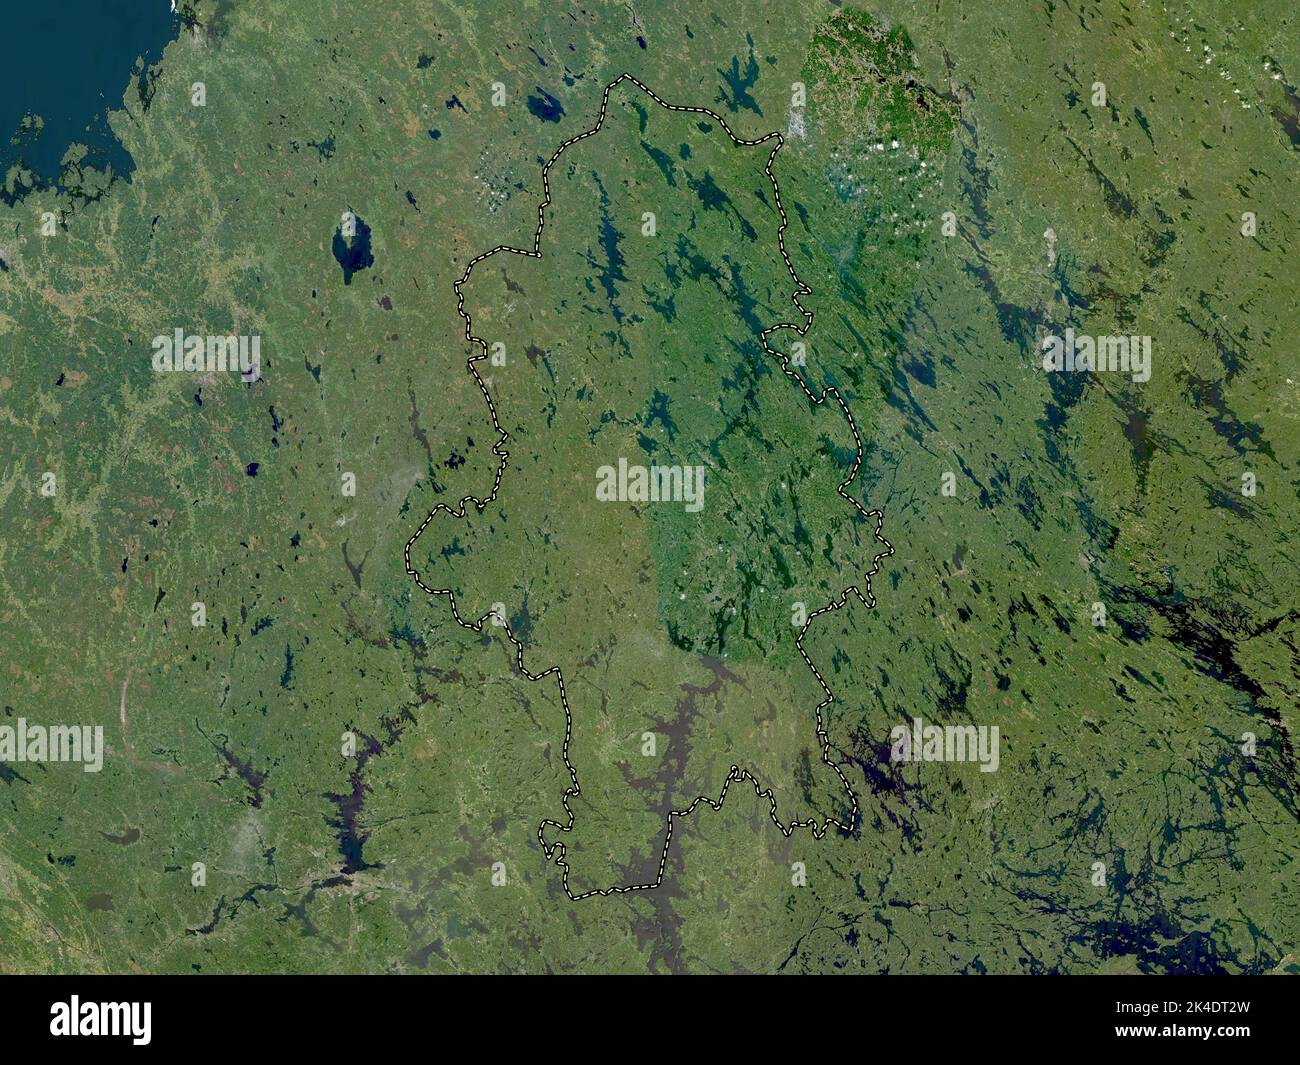 Central Finland, region of Finland. Low resolution satellite map Stock Photo